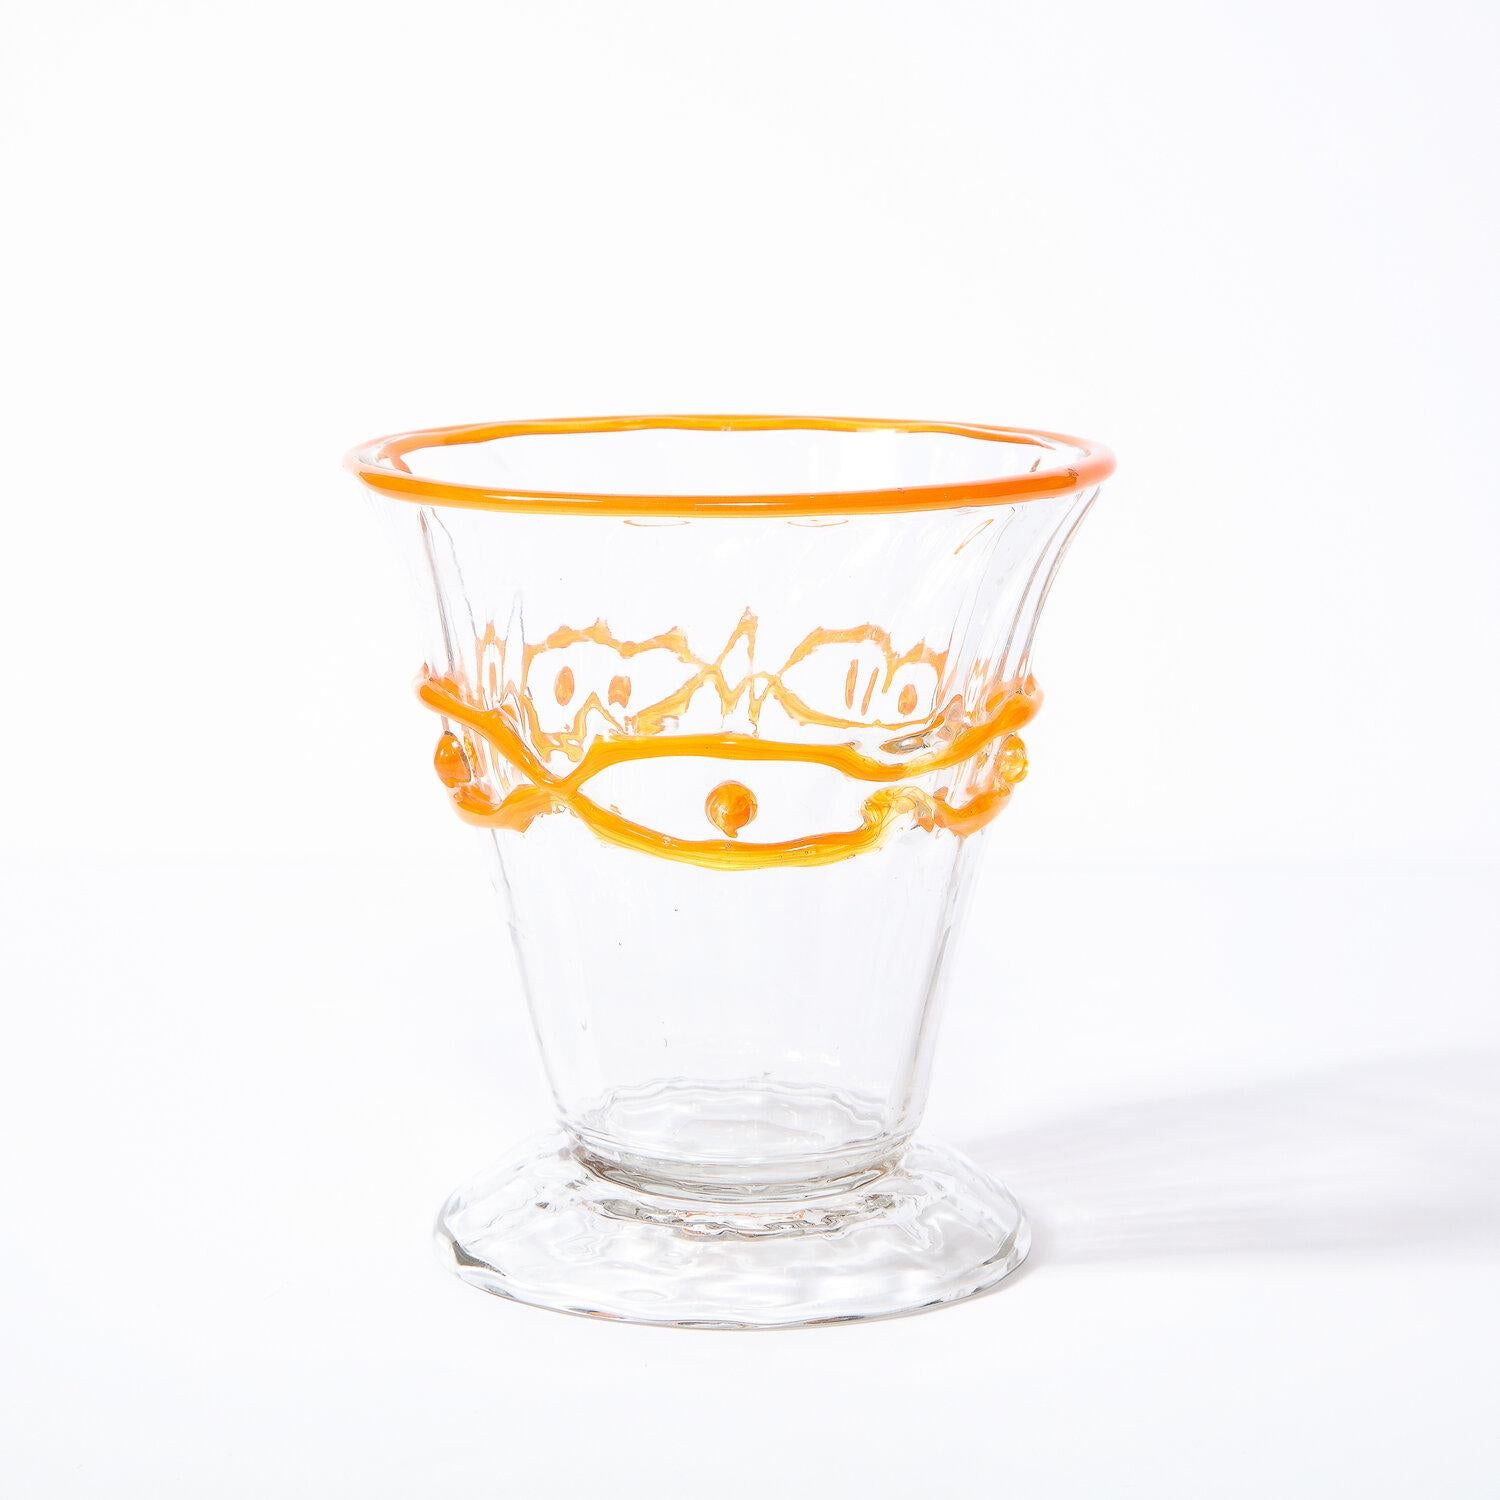 This refined Art Deco vase was realized and signed Daum Nancy in France circa 1920. It features a tapered conical body in translucent glass with a circular mouth adorned with tangerine accents and geometric detailing (in the same hue) circumscribing